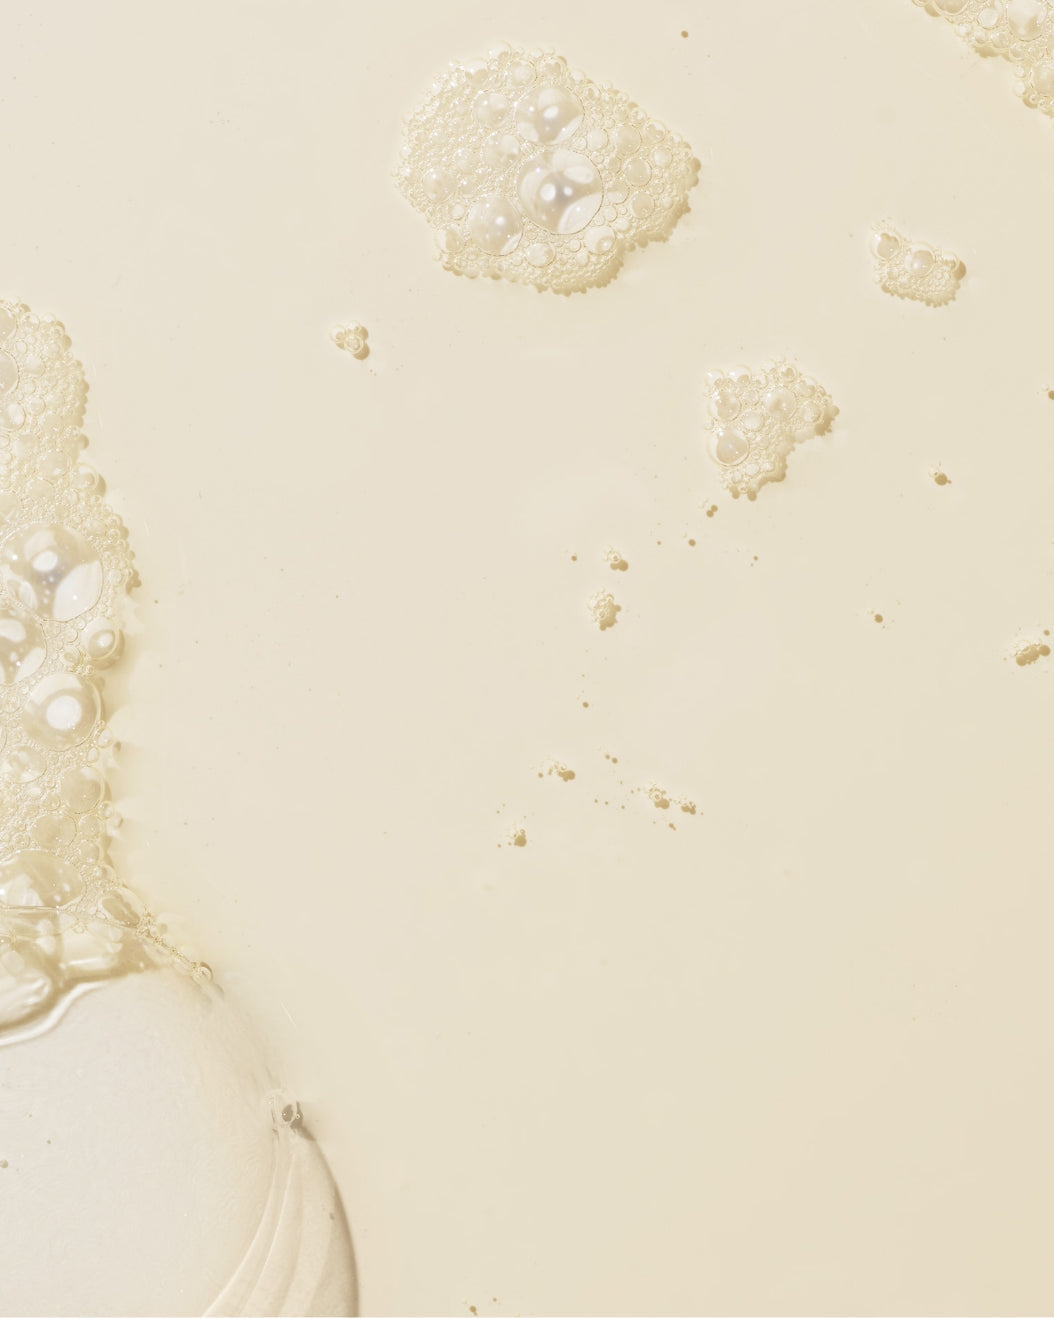 Product close-up of foam found in Milk Makeup Hydro Ungrip Makeup Remover + Cleansing Water